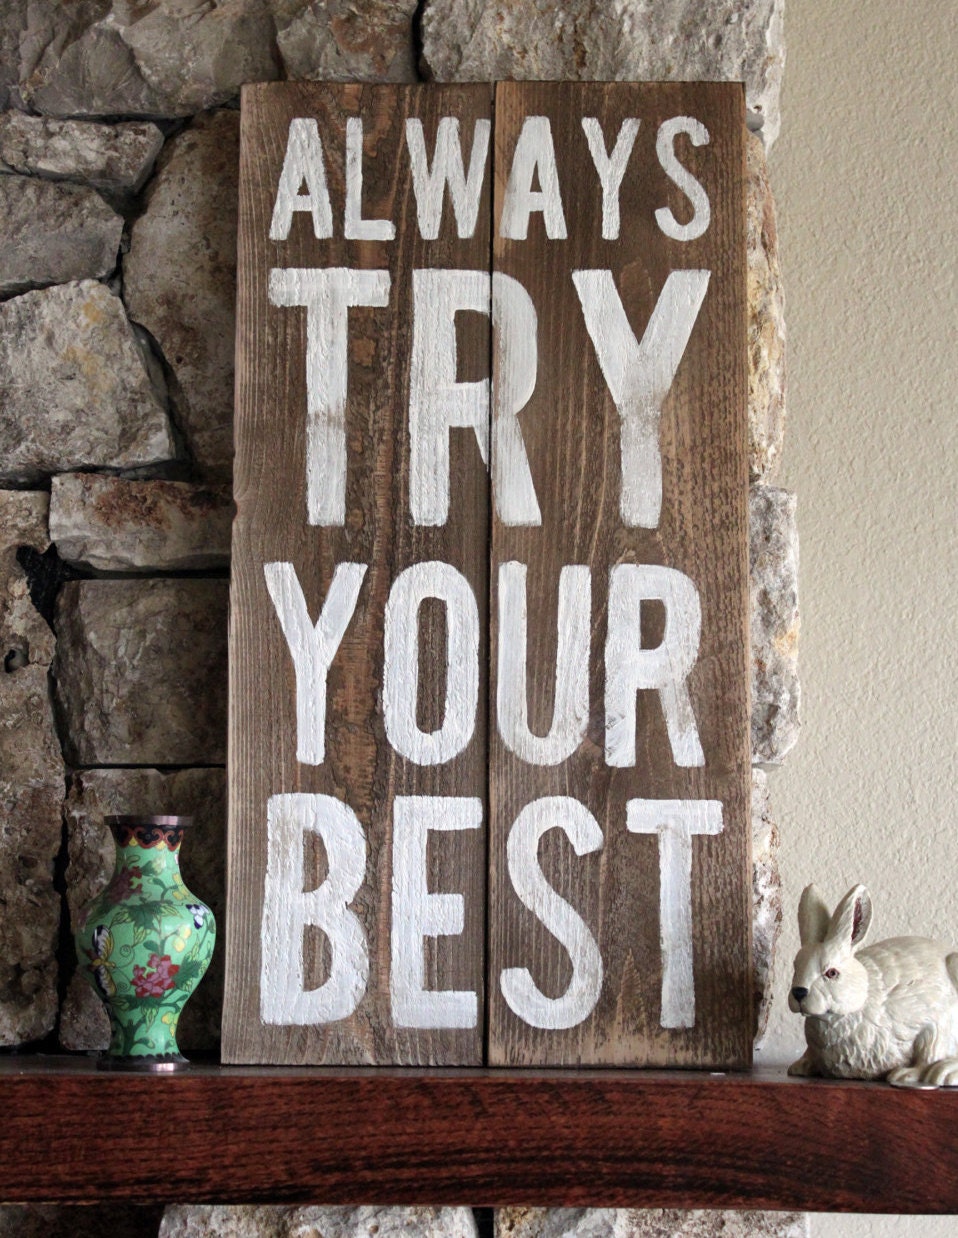 Do you best. Do your best. Картинка try your best. You best. Always do your best